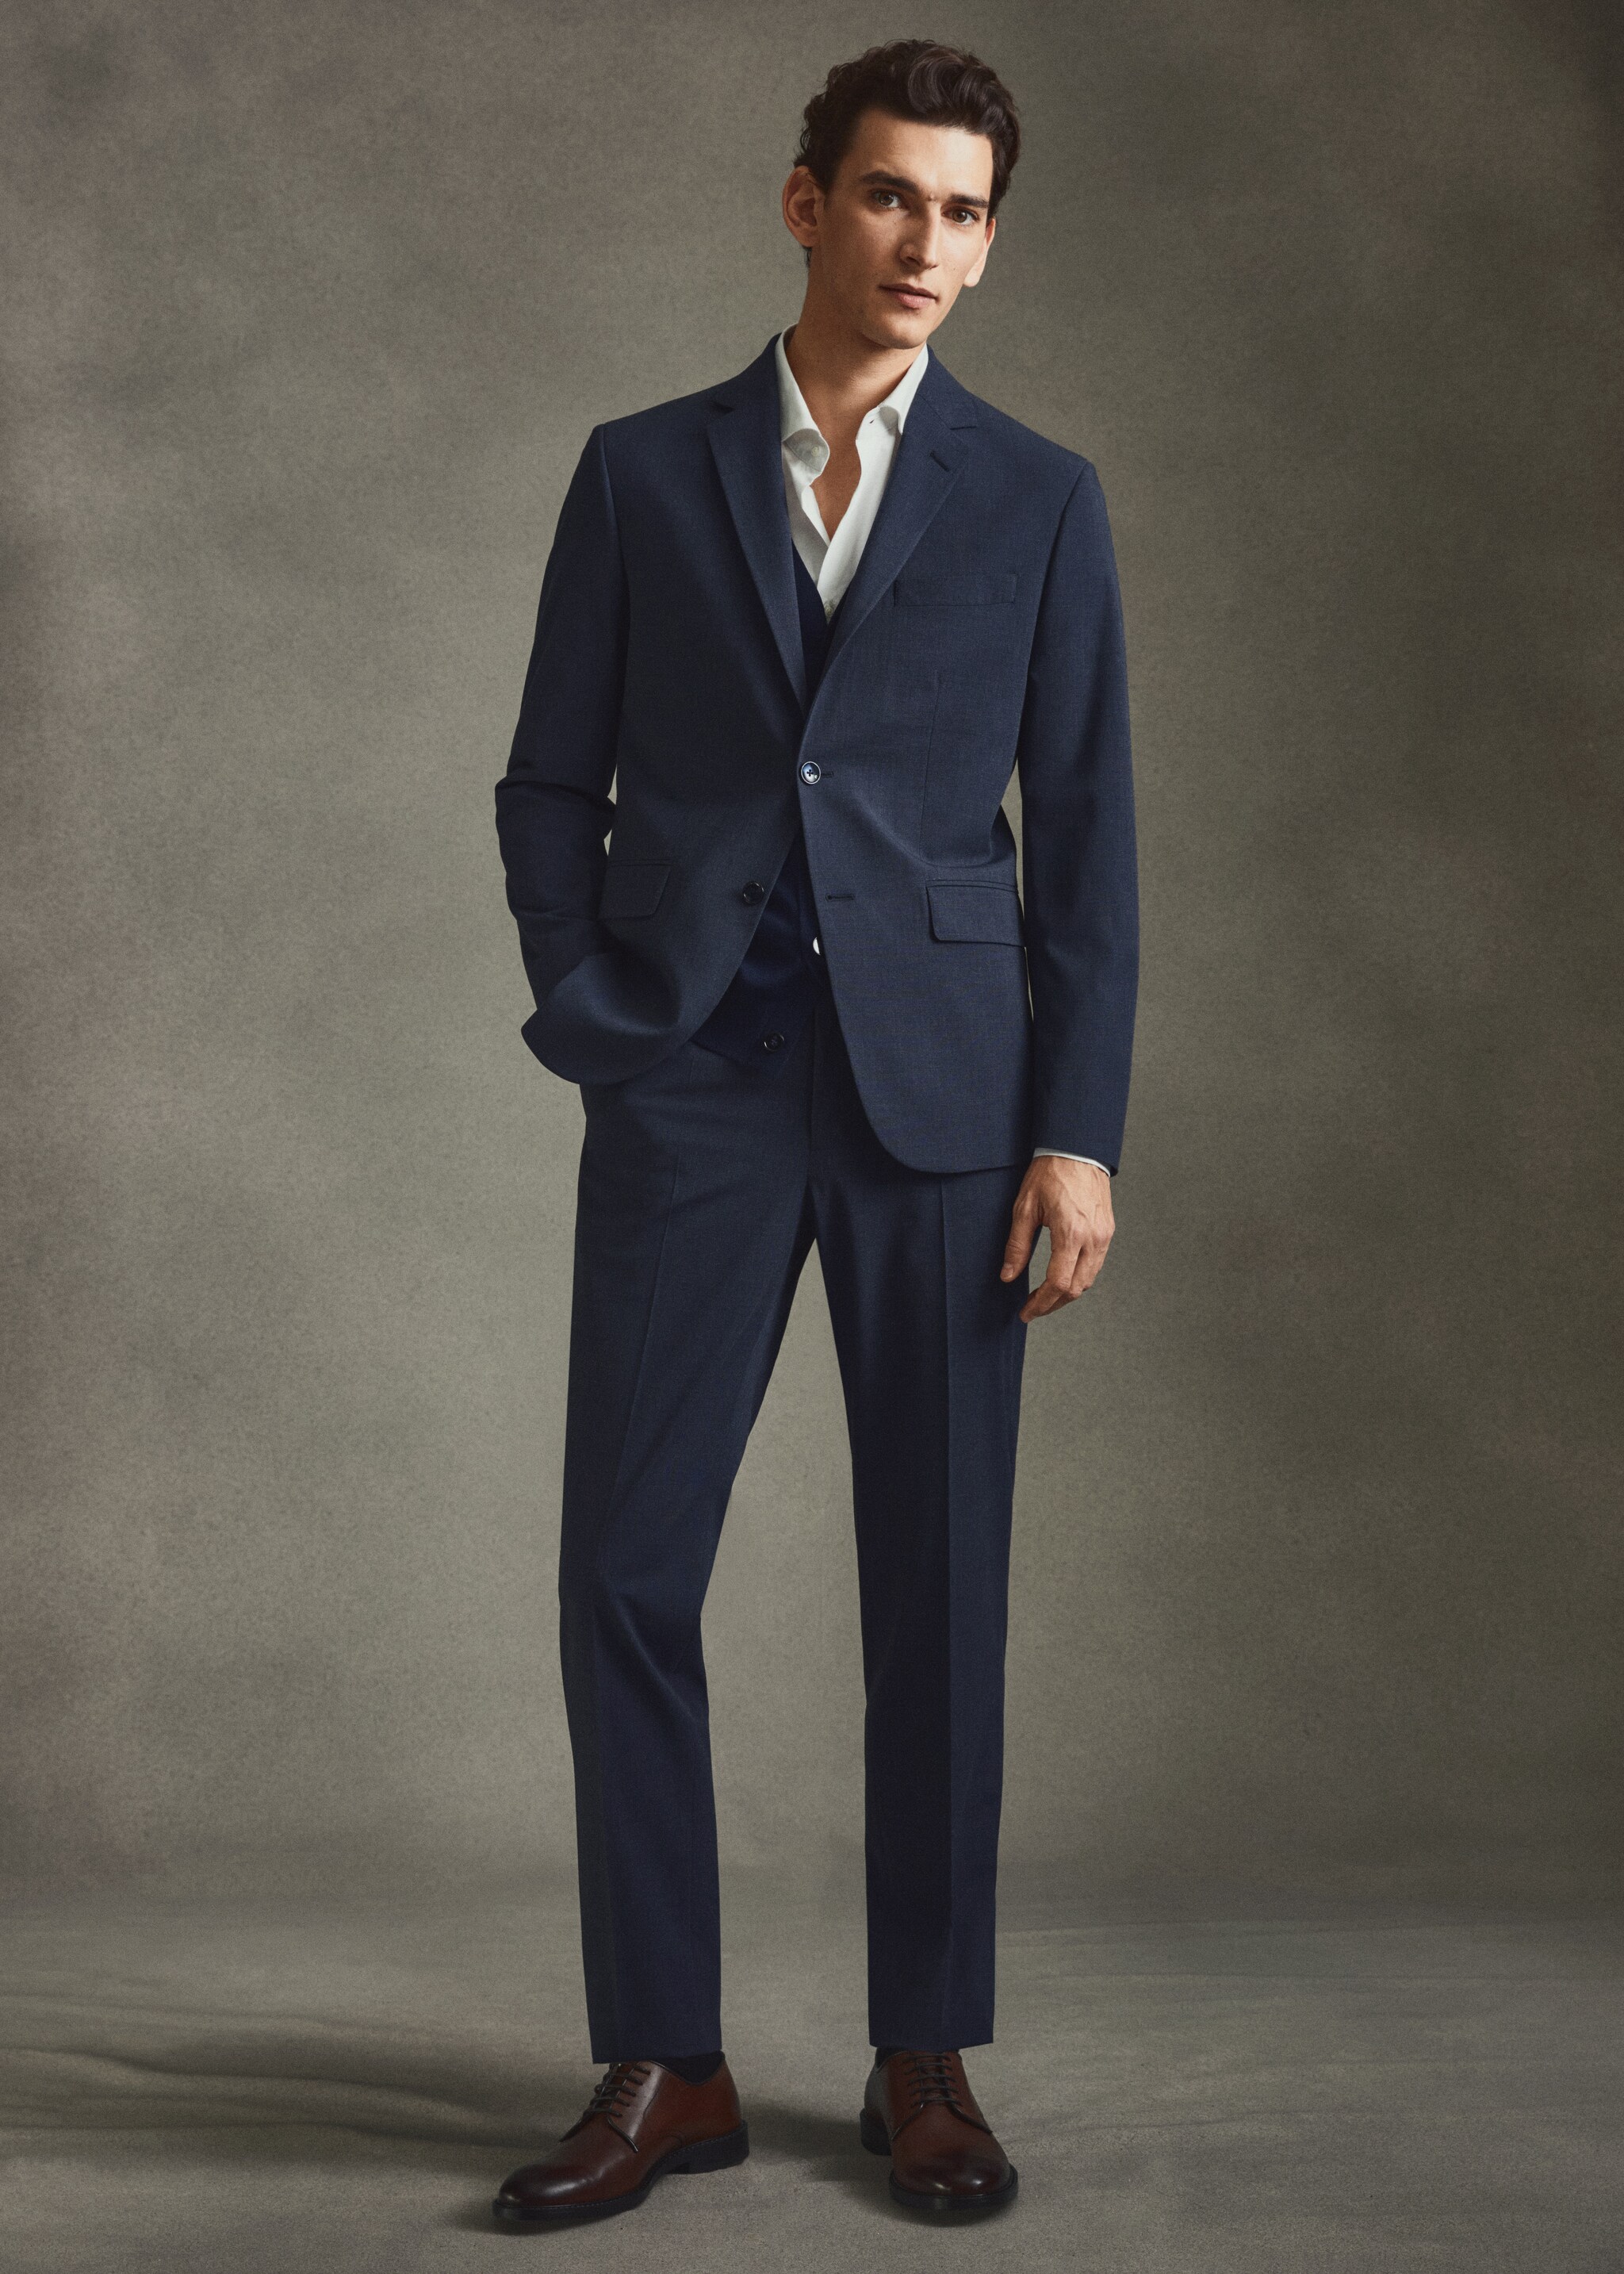  Suit trousers - Details of the article 5